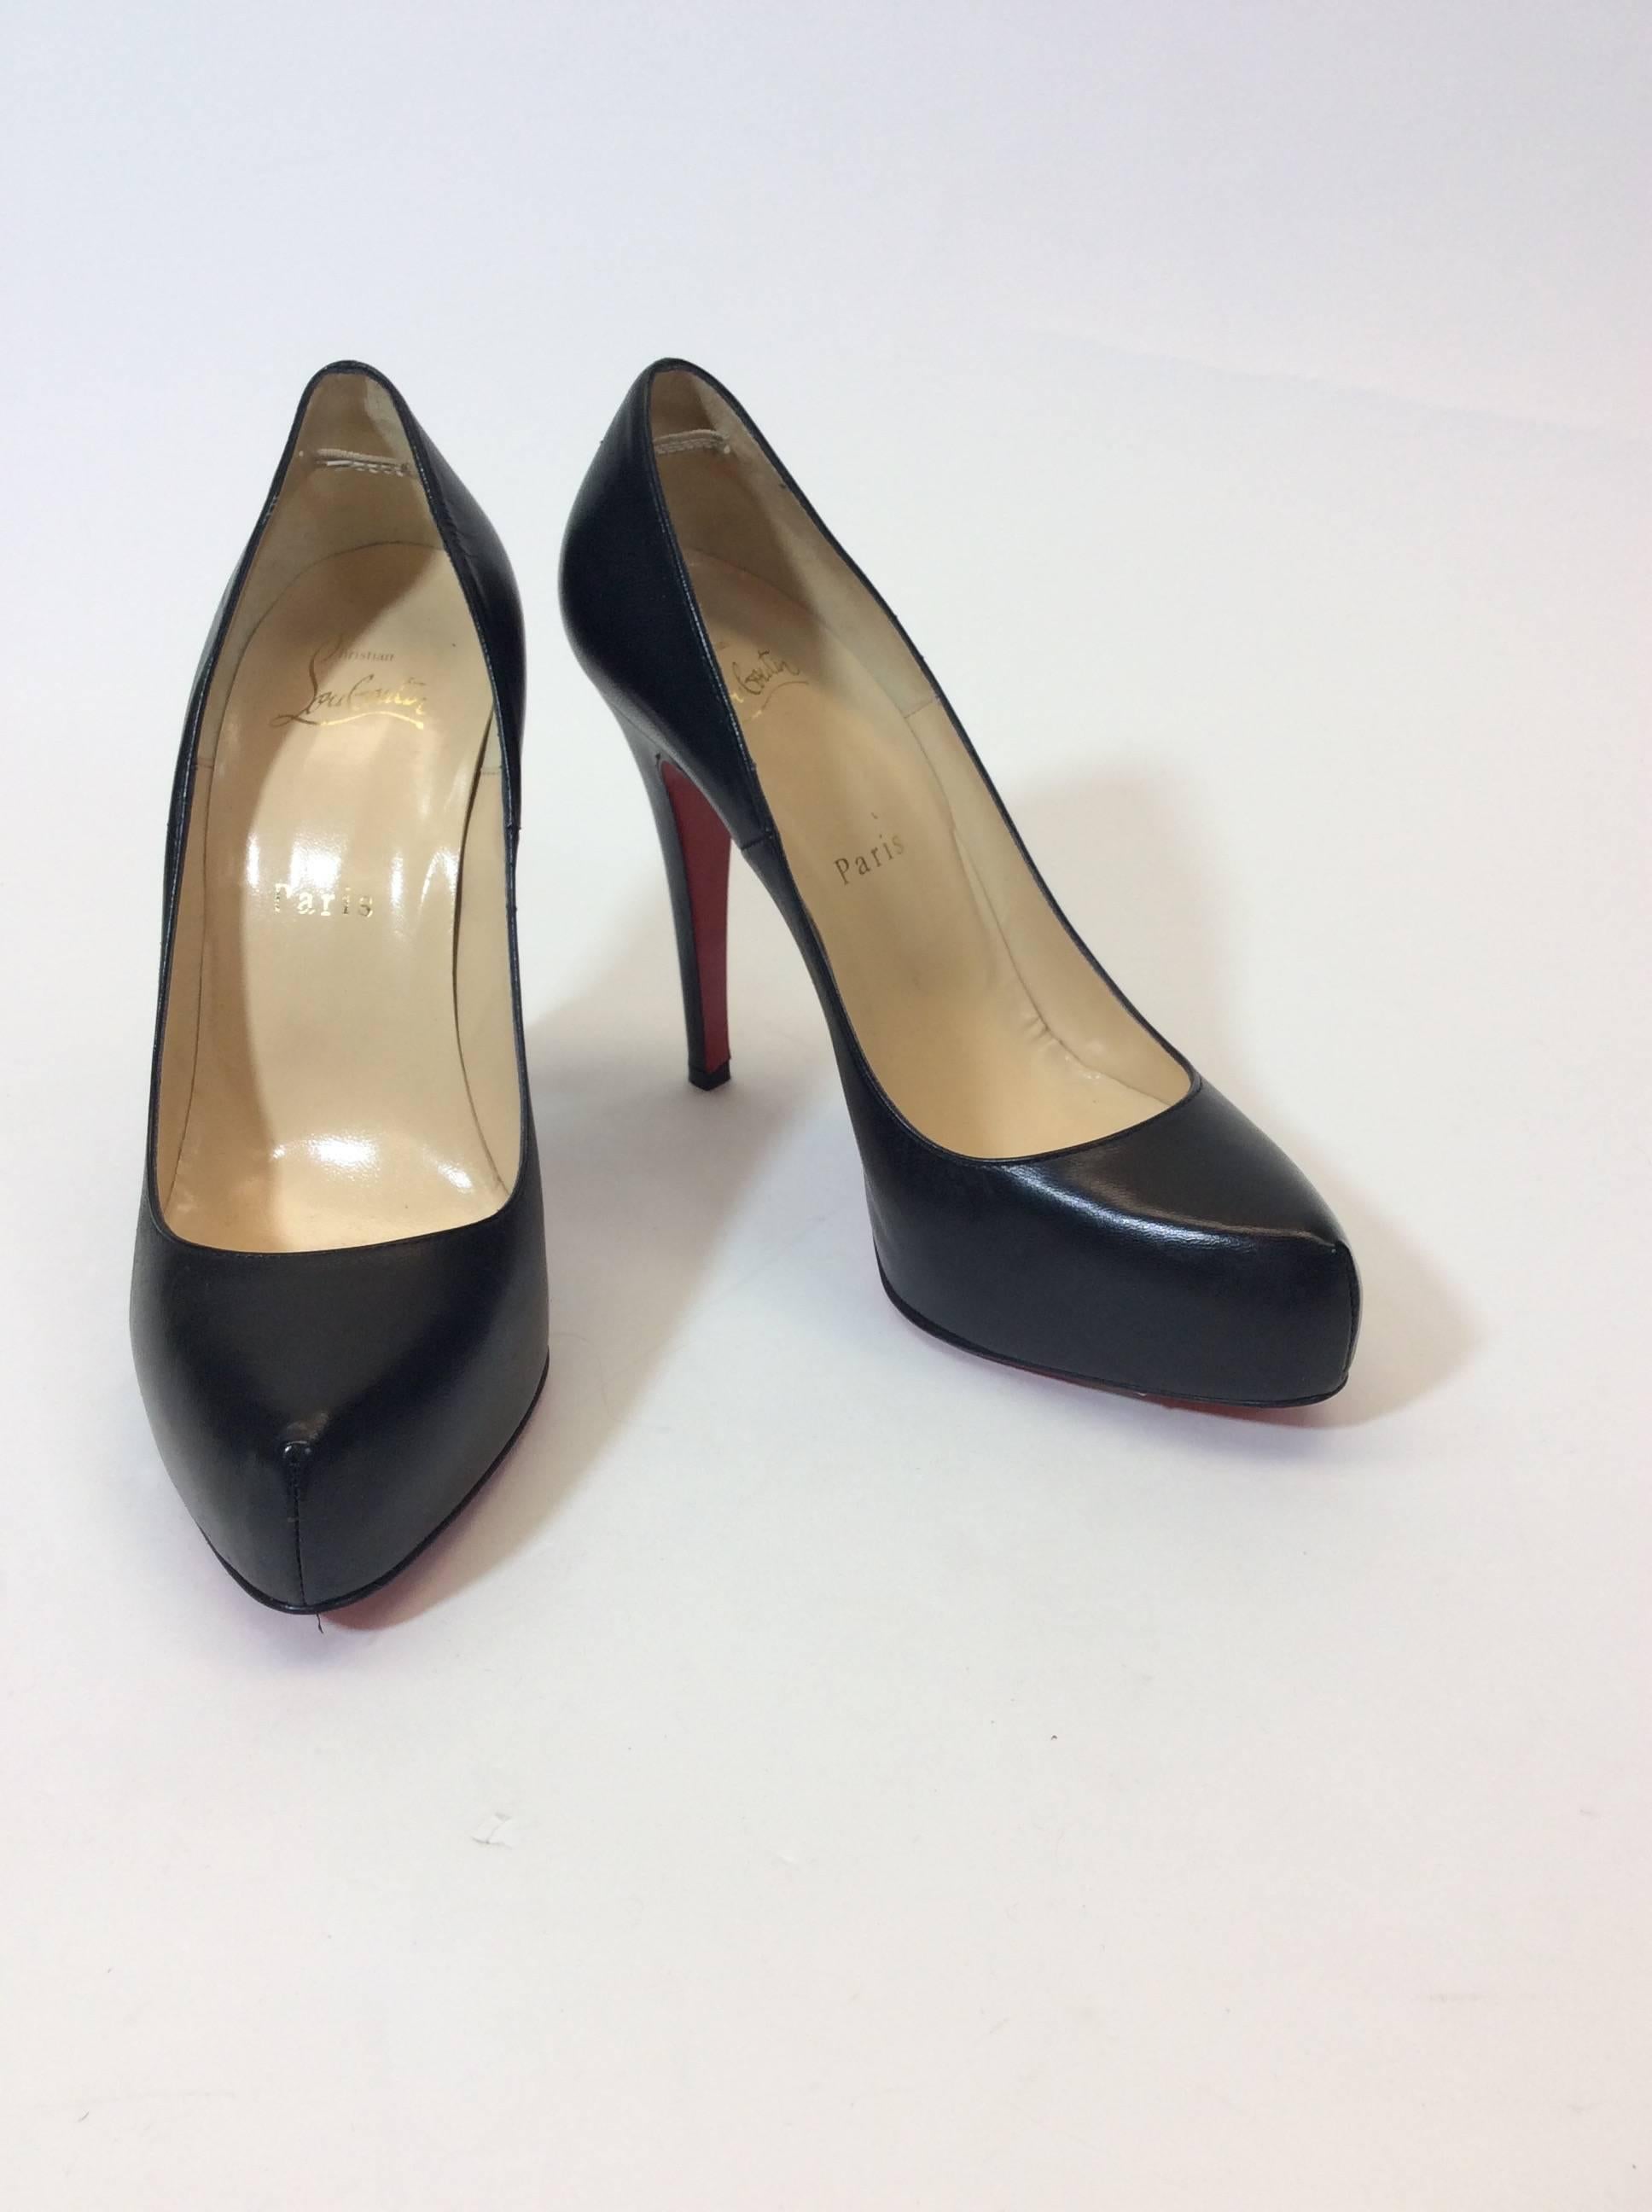 Black Leather Pump
Iconic Red Sole with Minimal Wear
3